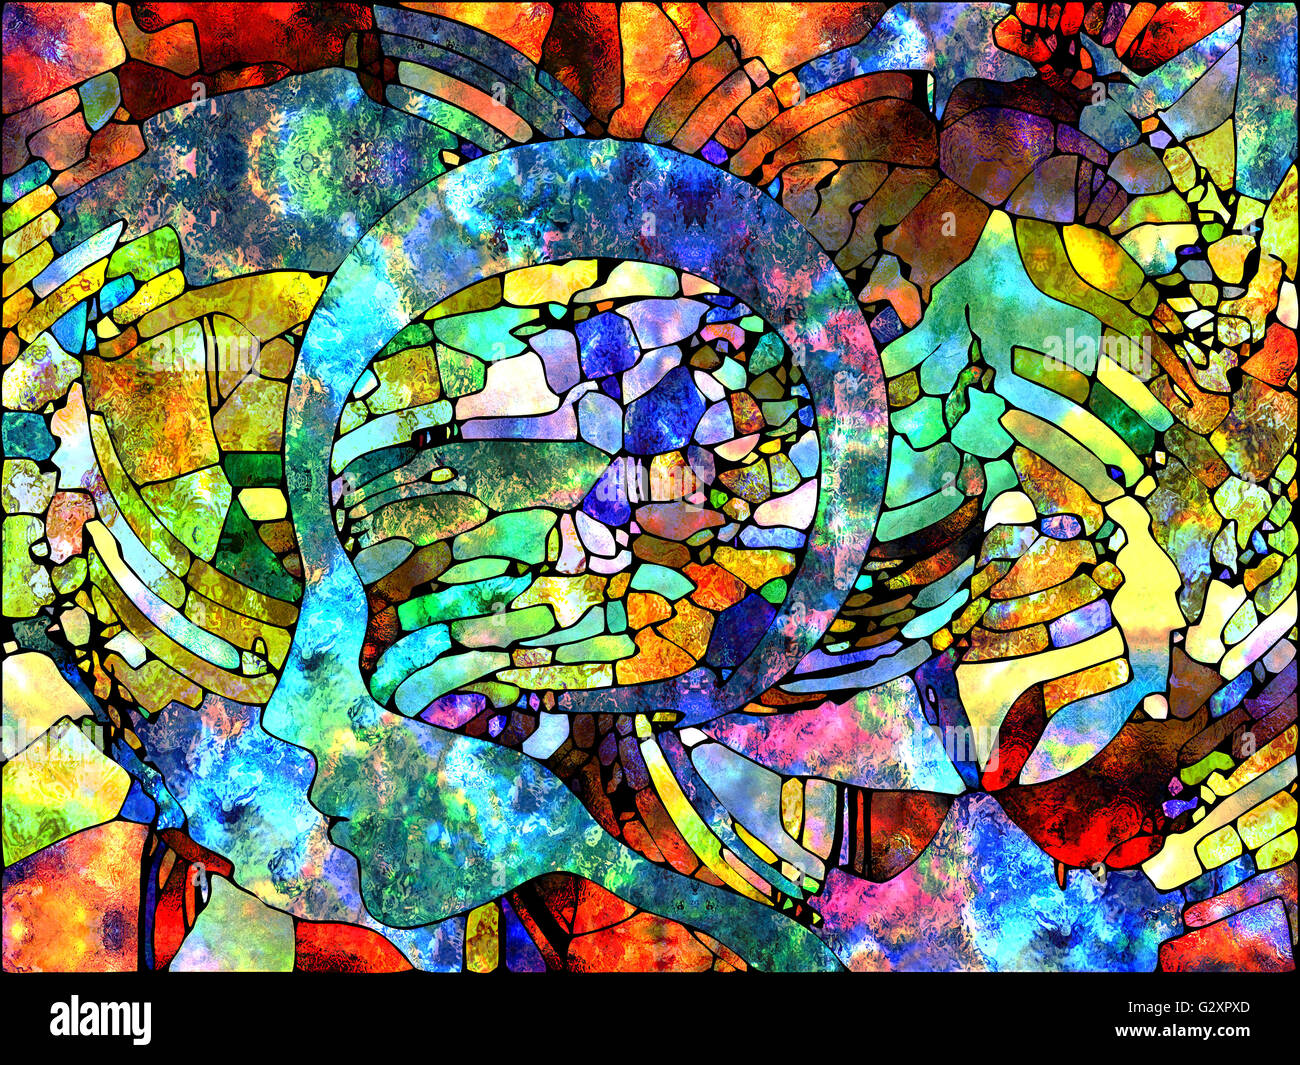 Digital Stained Glass series. Backdrop composed of colorful